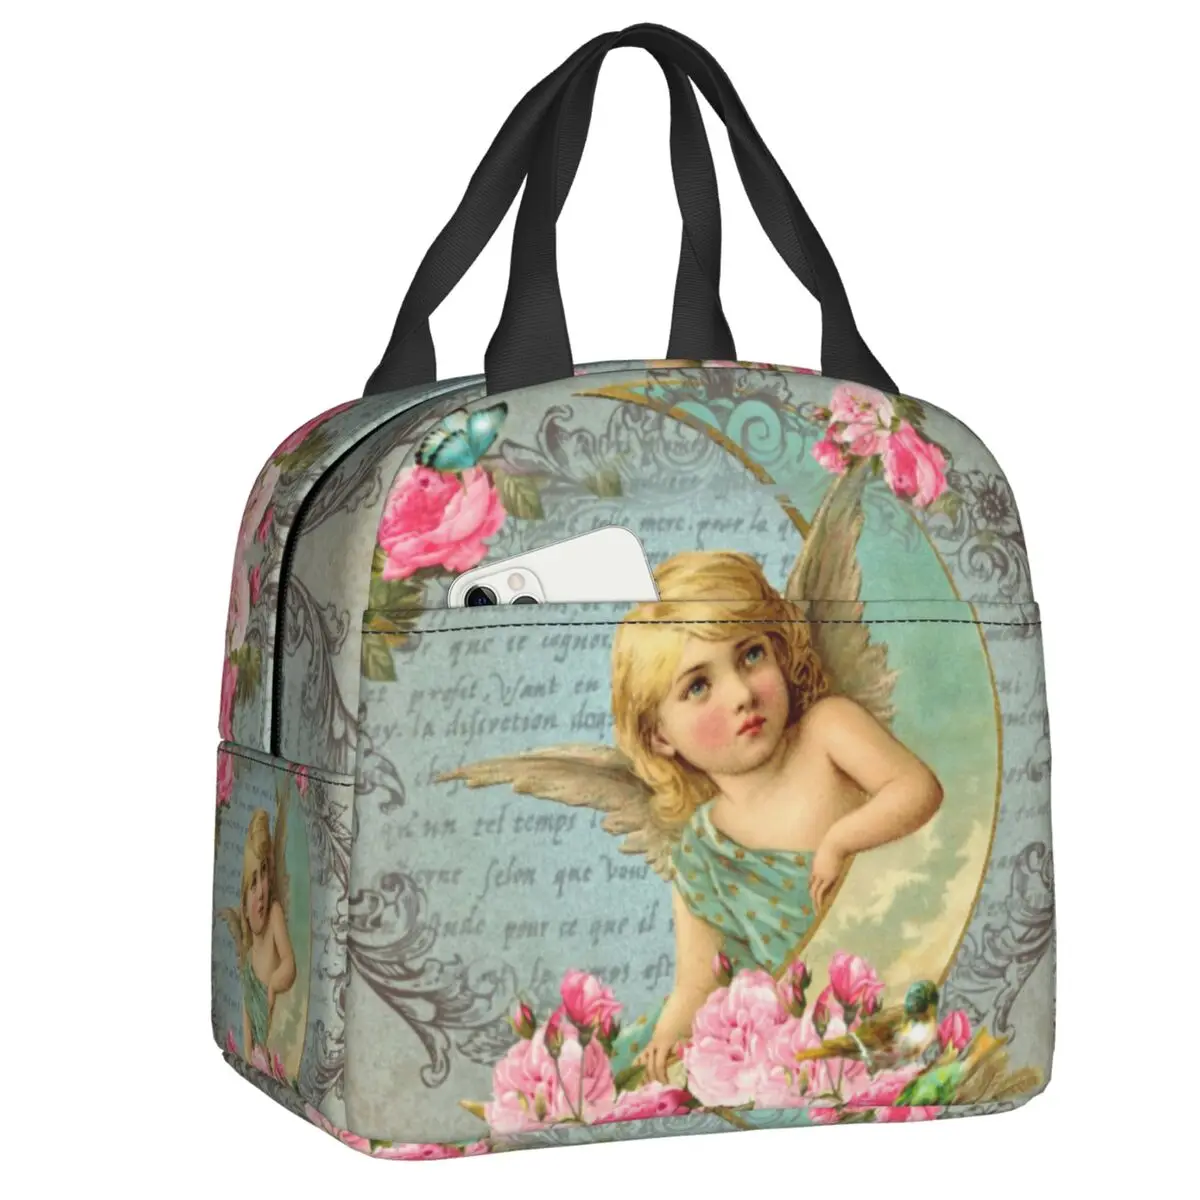 

Vintage Rose Victorian Angel Insulated Lunch Bag Waterproof Cooler Thermal Lunch Box For Women Kids Food Container Tote Bags